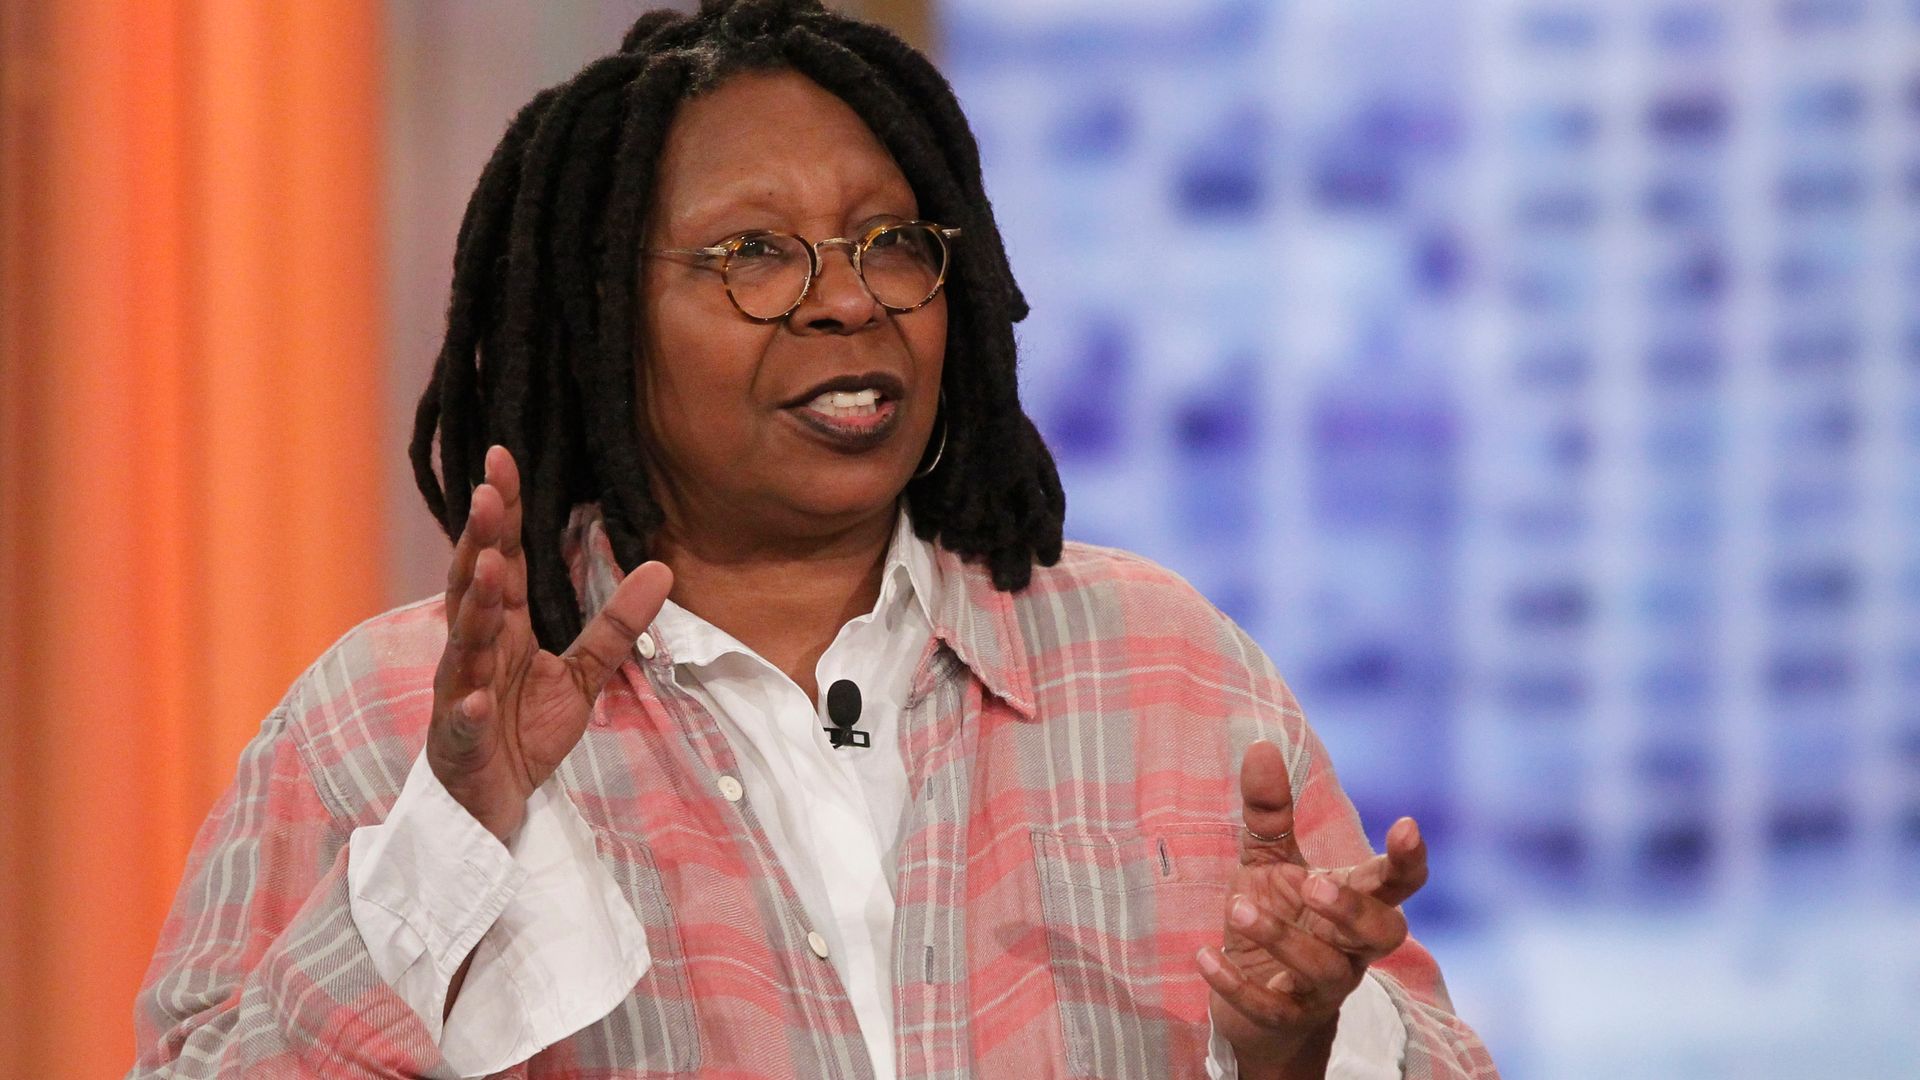 Whoopi Goldberg defends Princess of Wales for editing 'amateur' Mother's Day photo